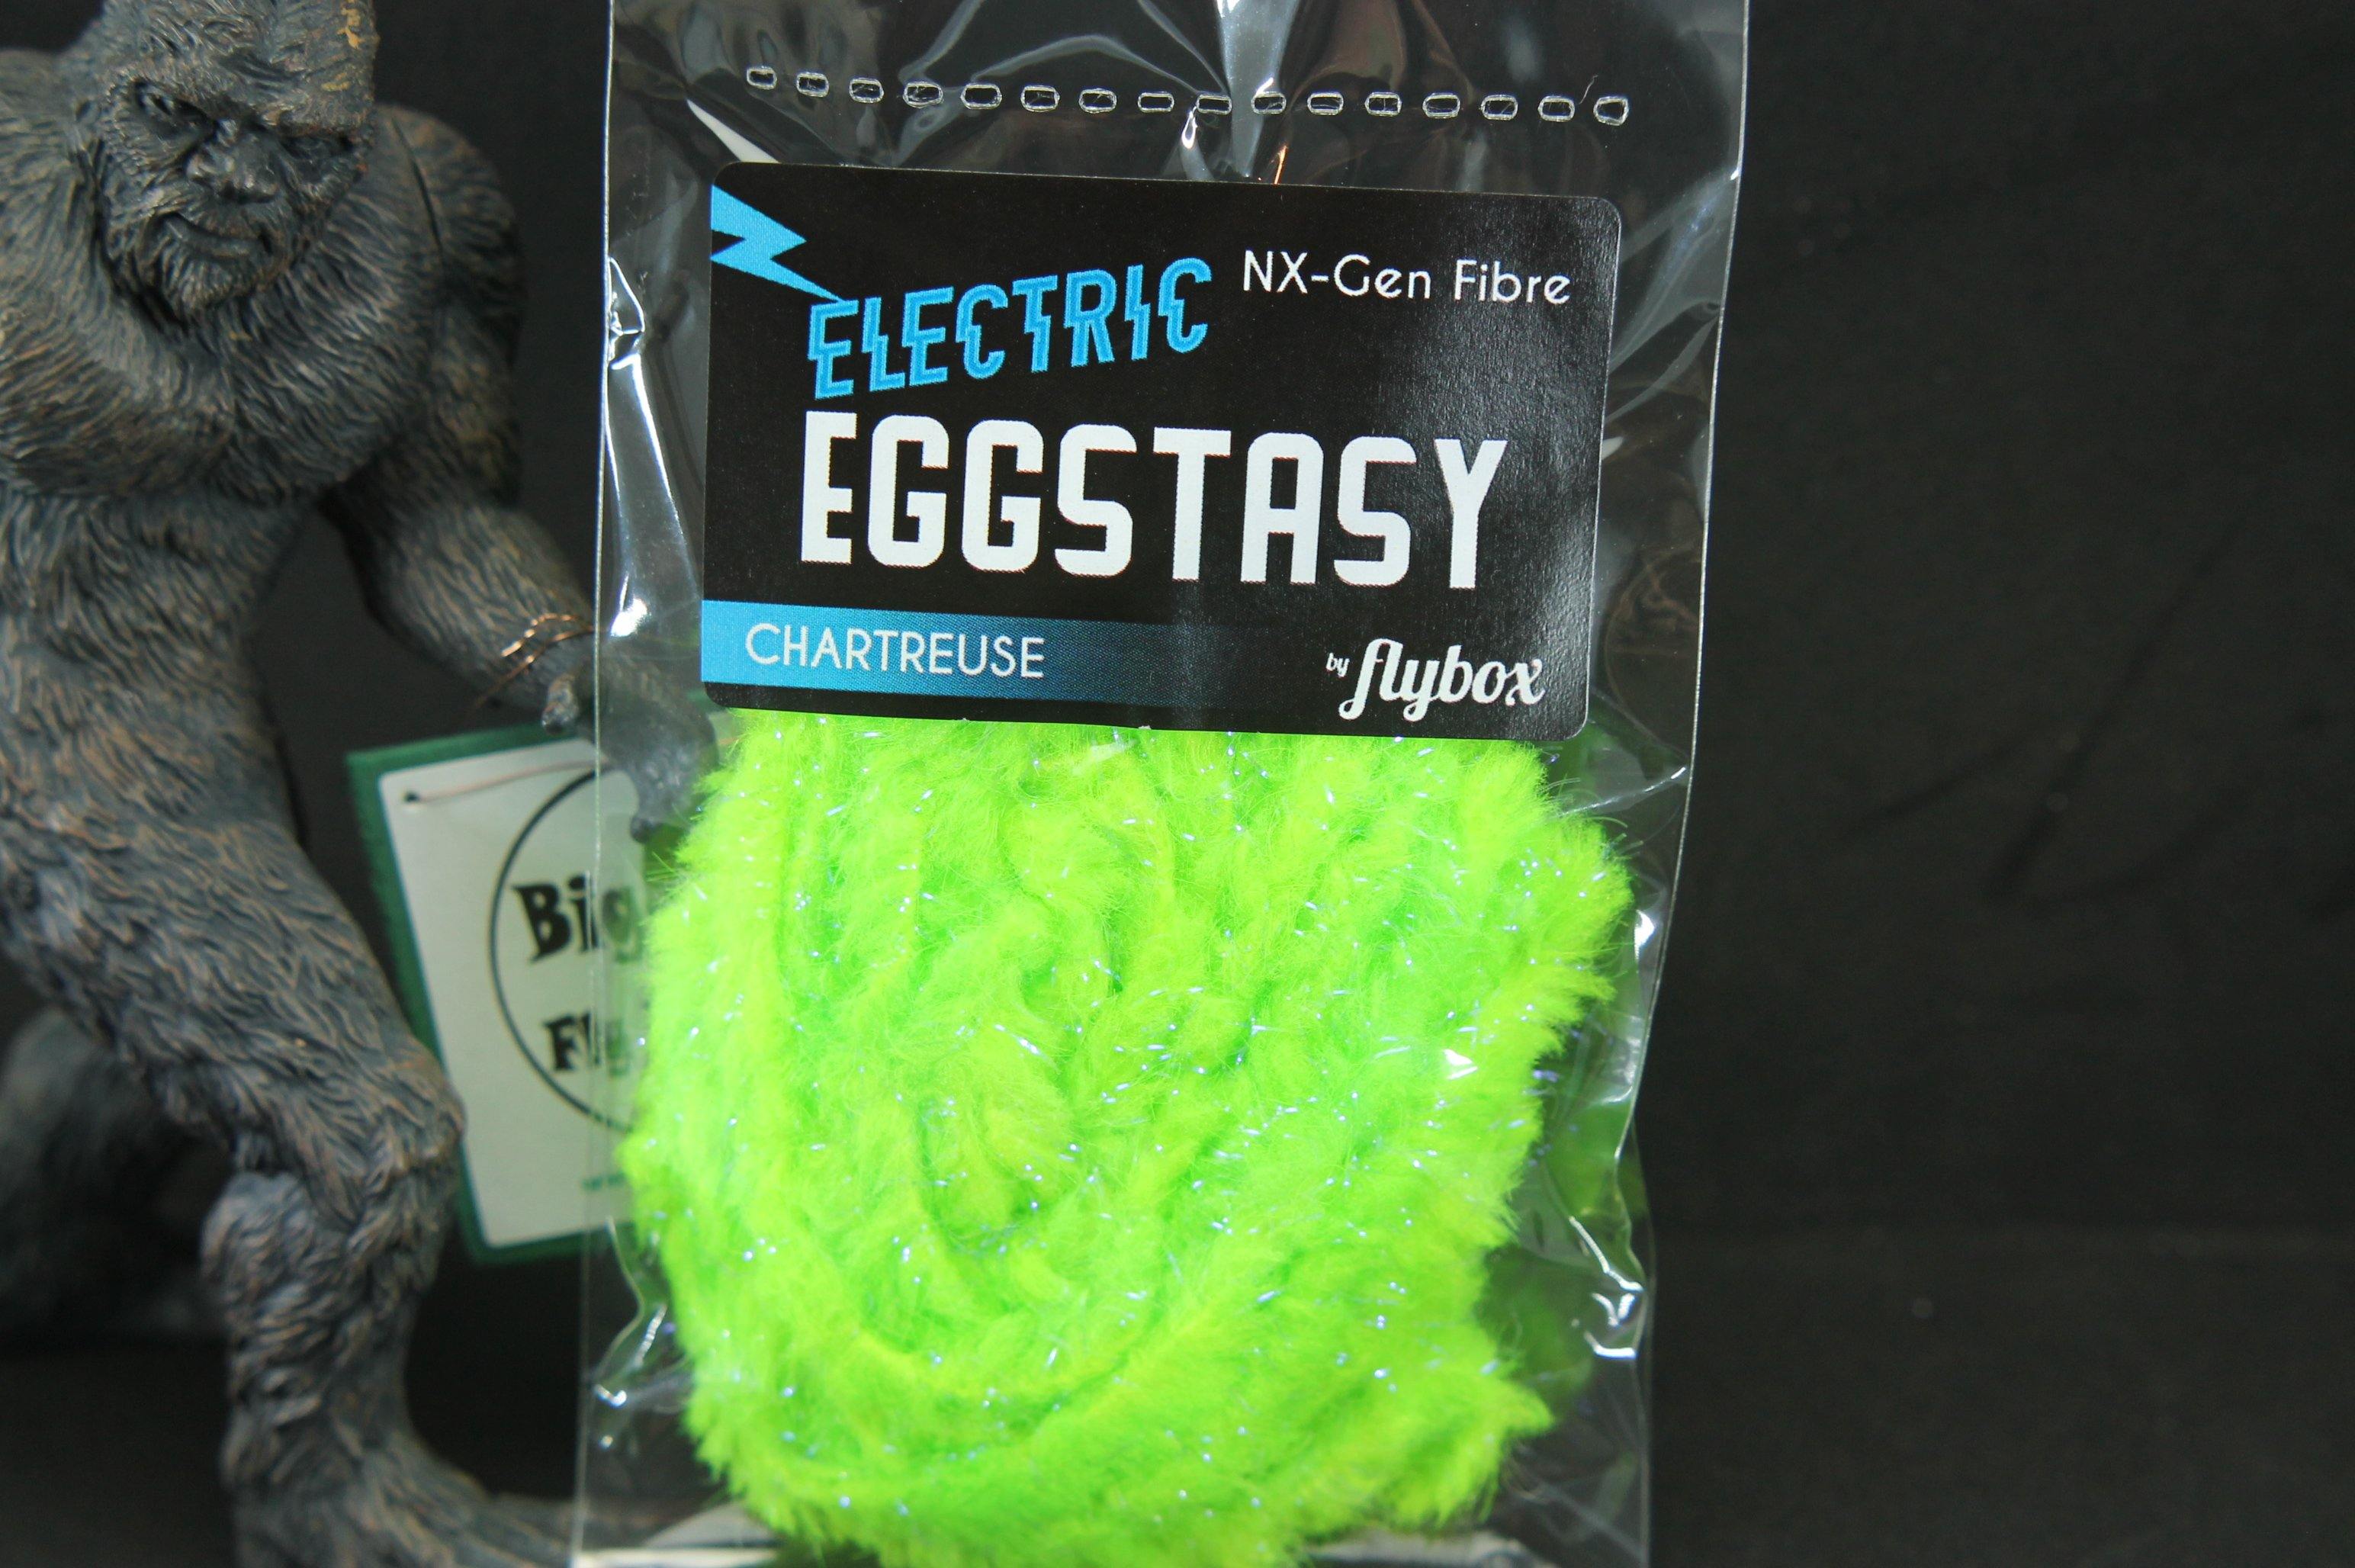 Electric Eggstacy - Big T Fly Fishing